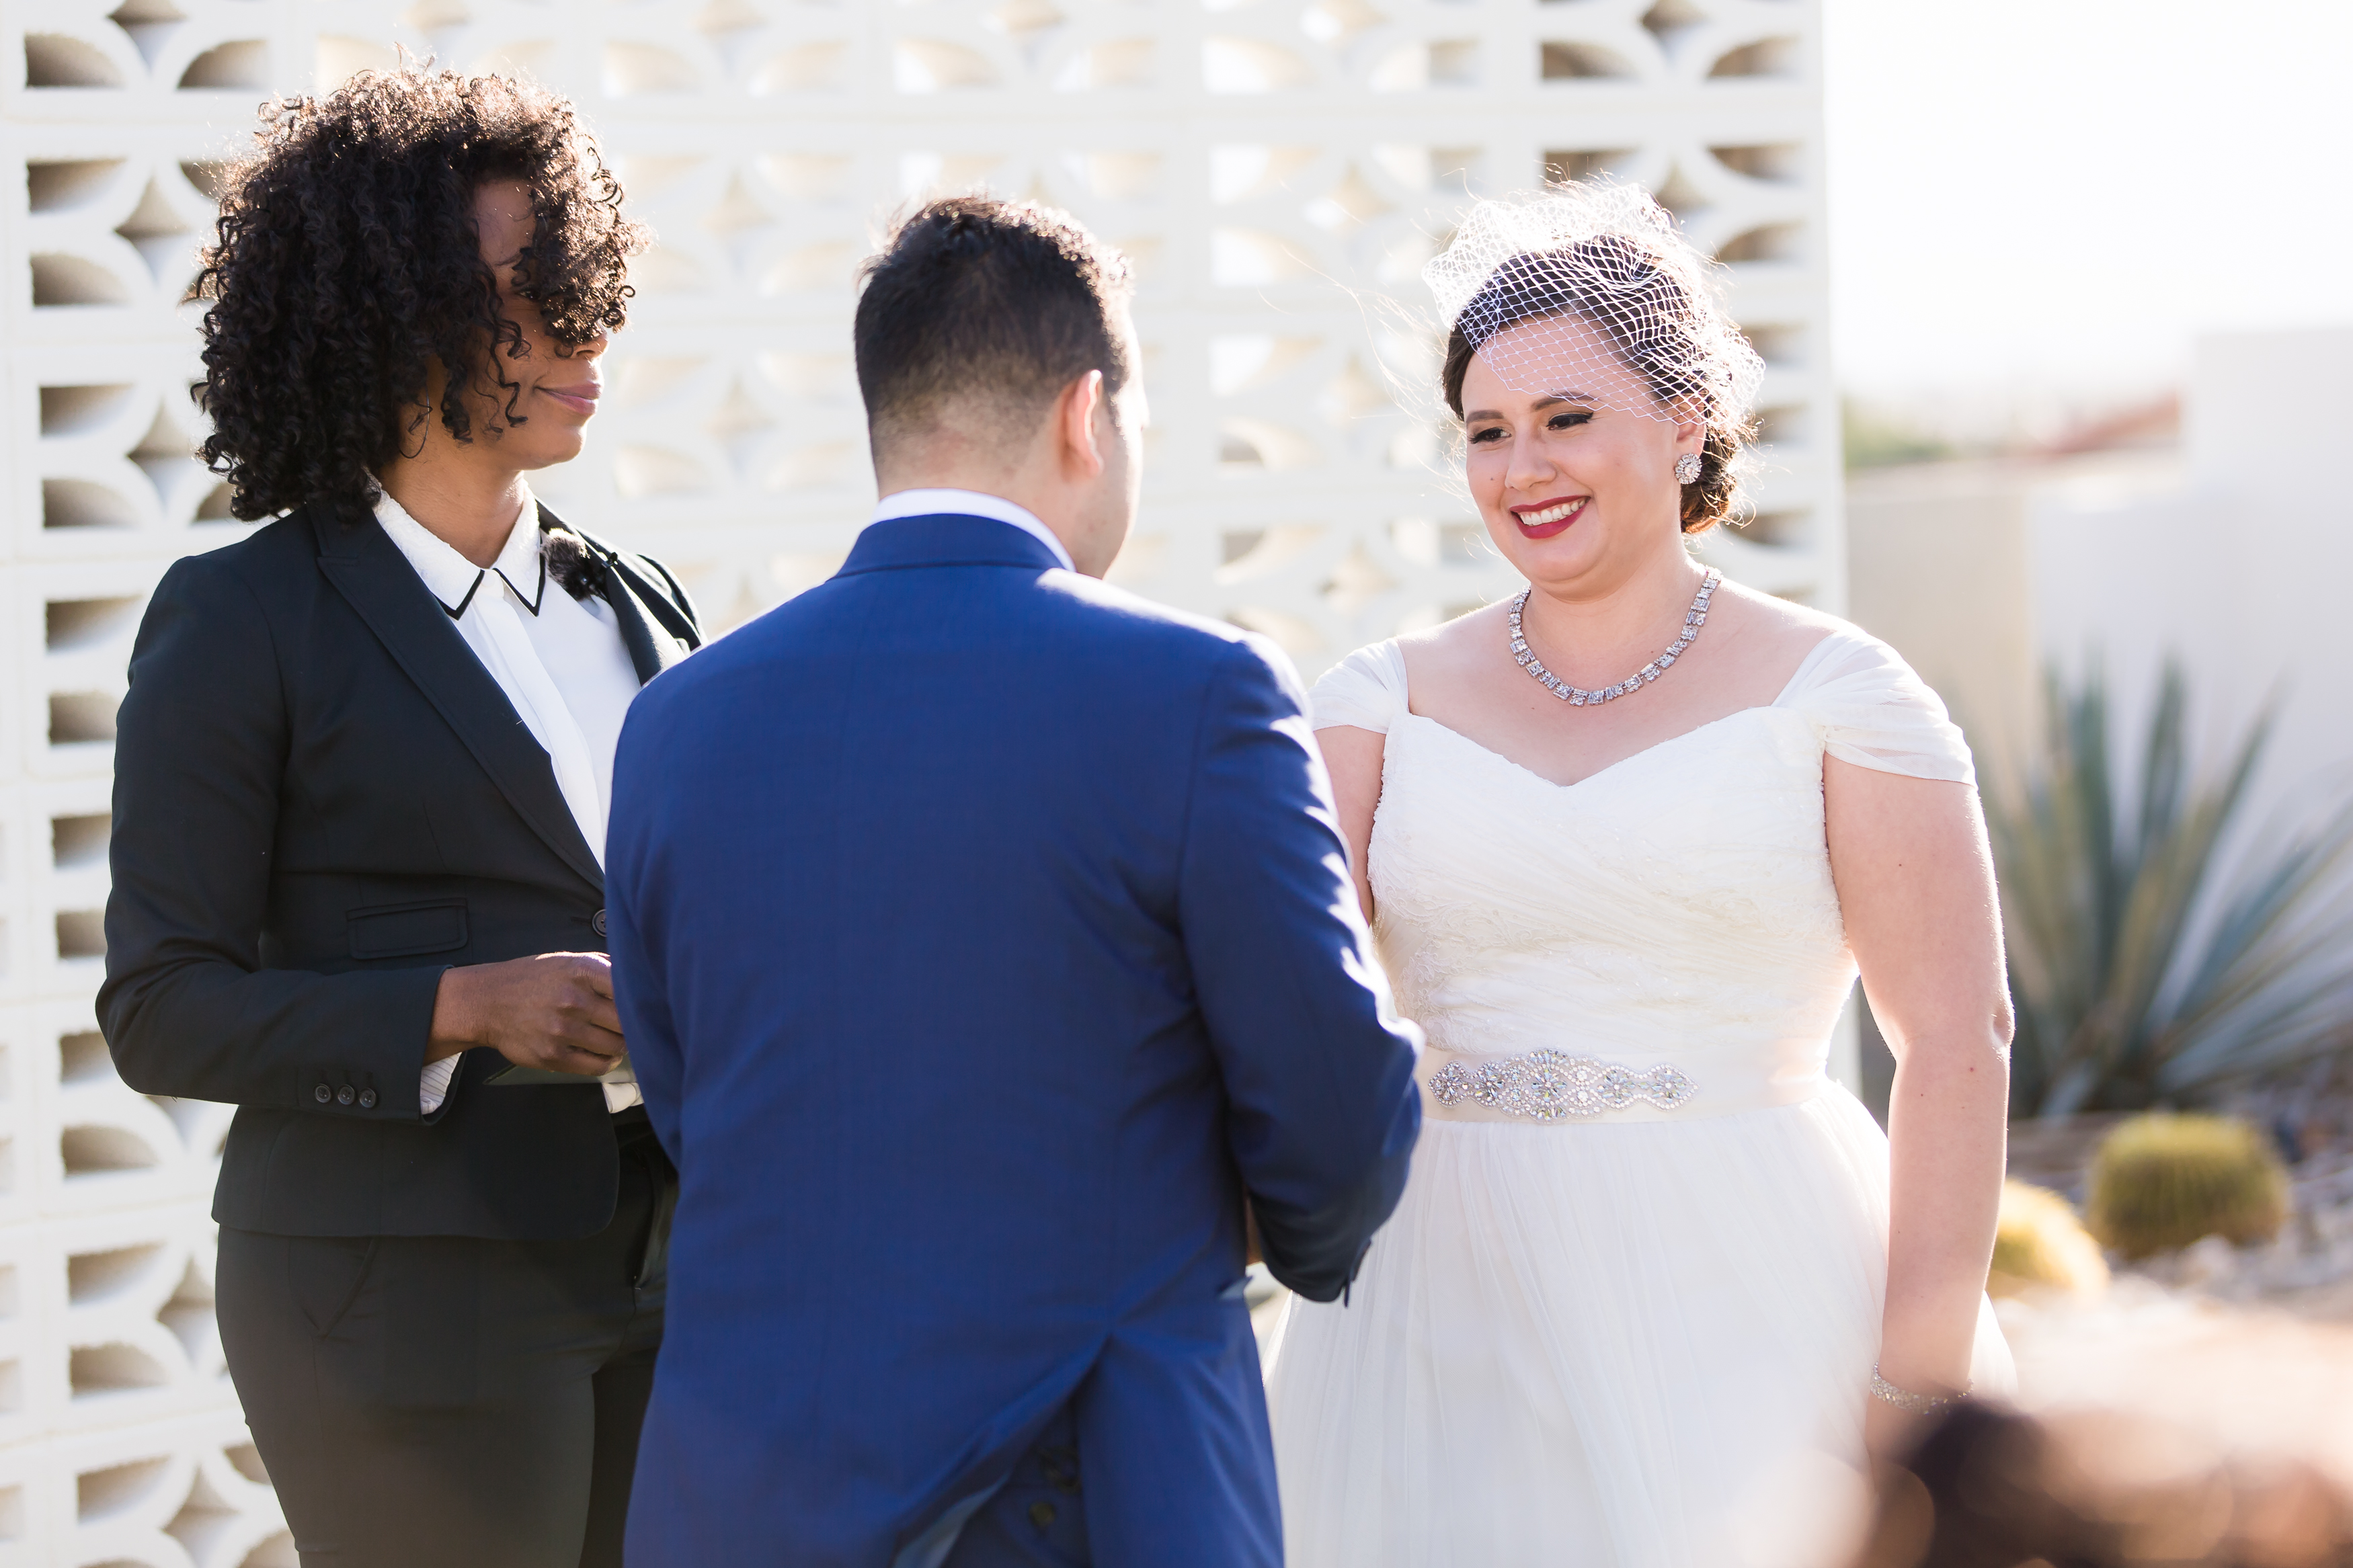 Bride smiling at groom during outdoor wedding ceremony 